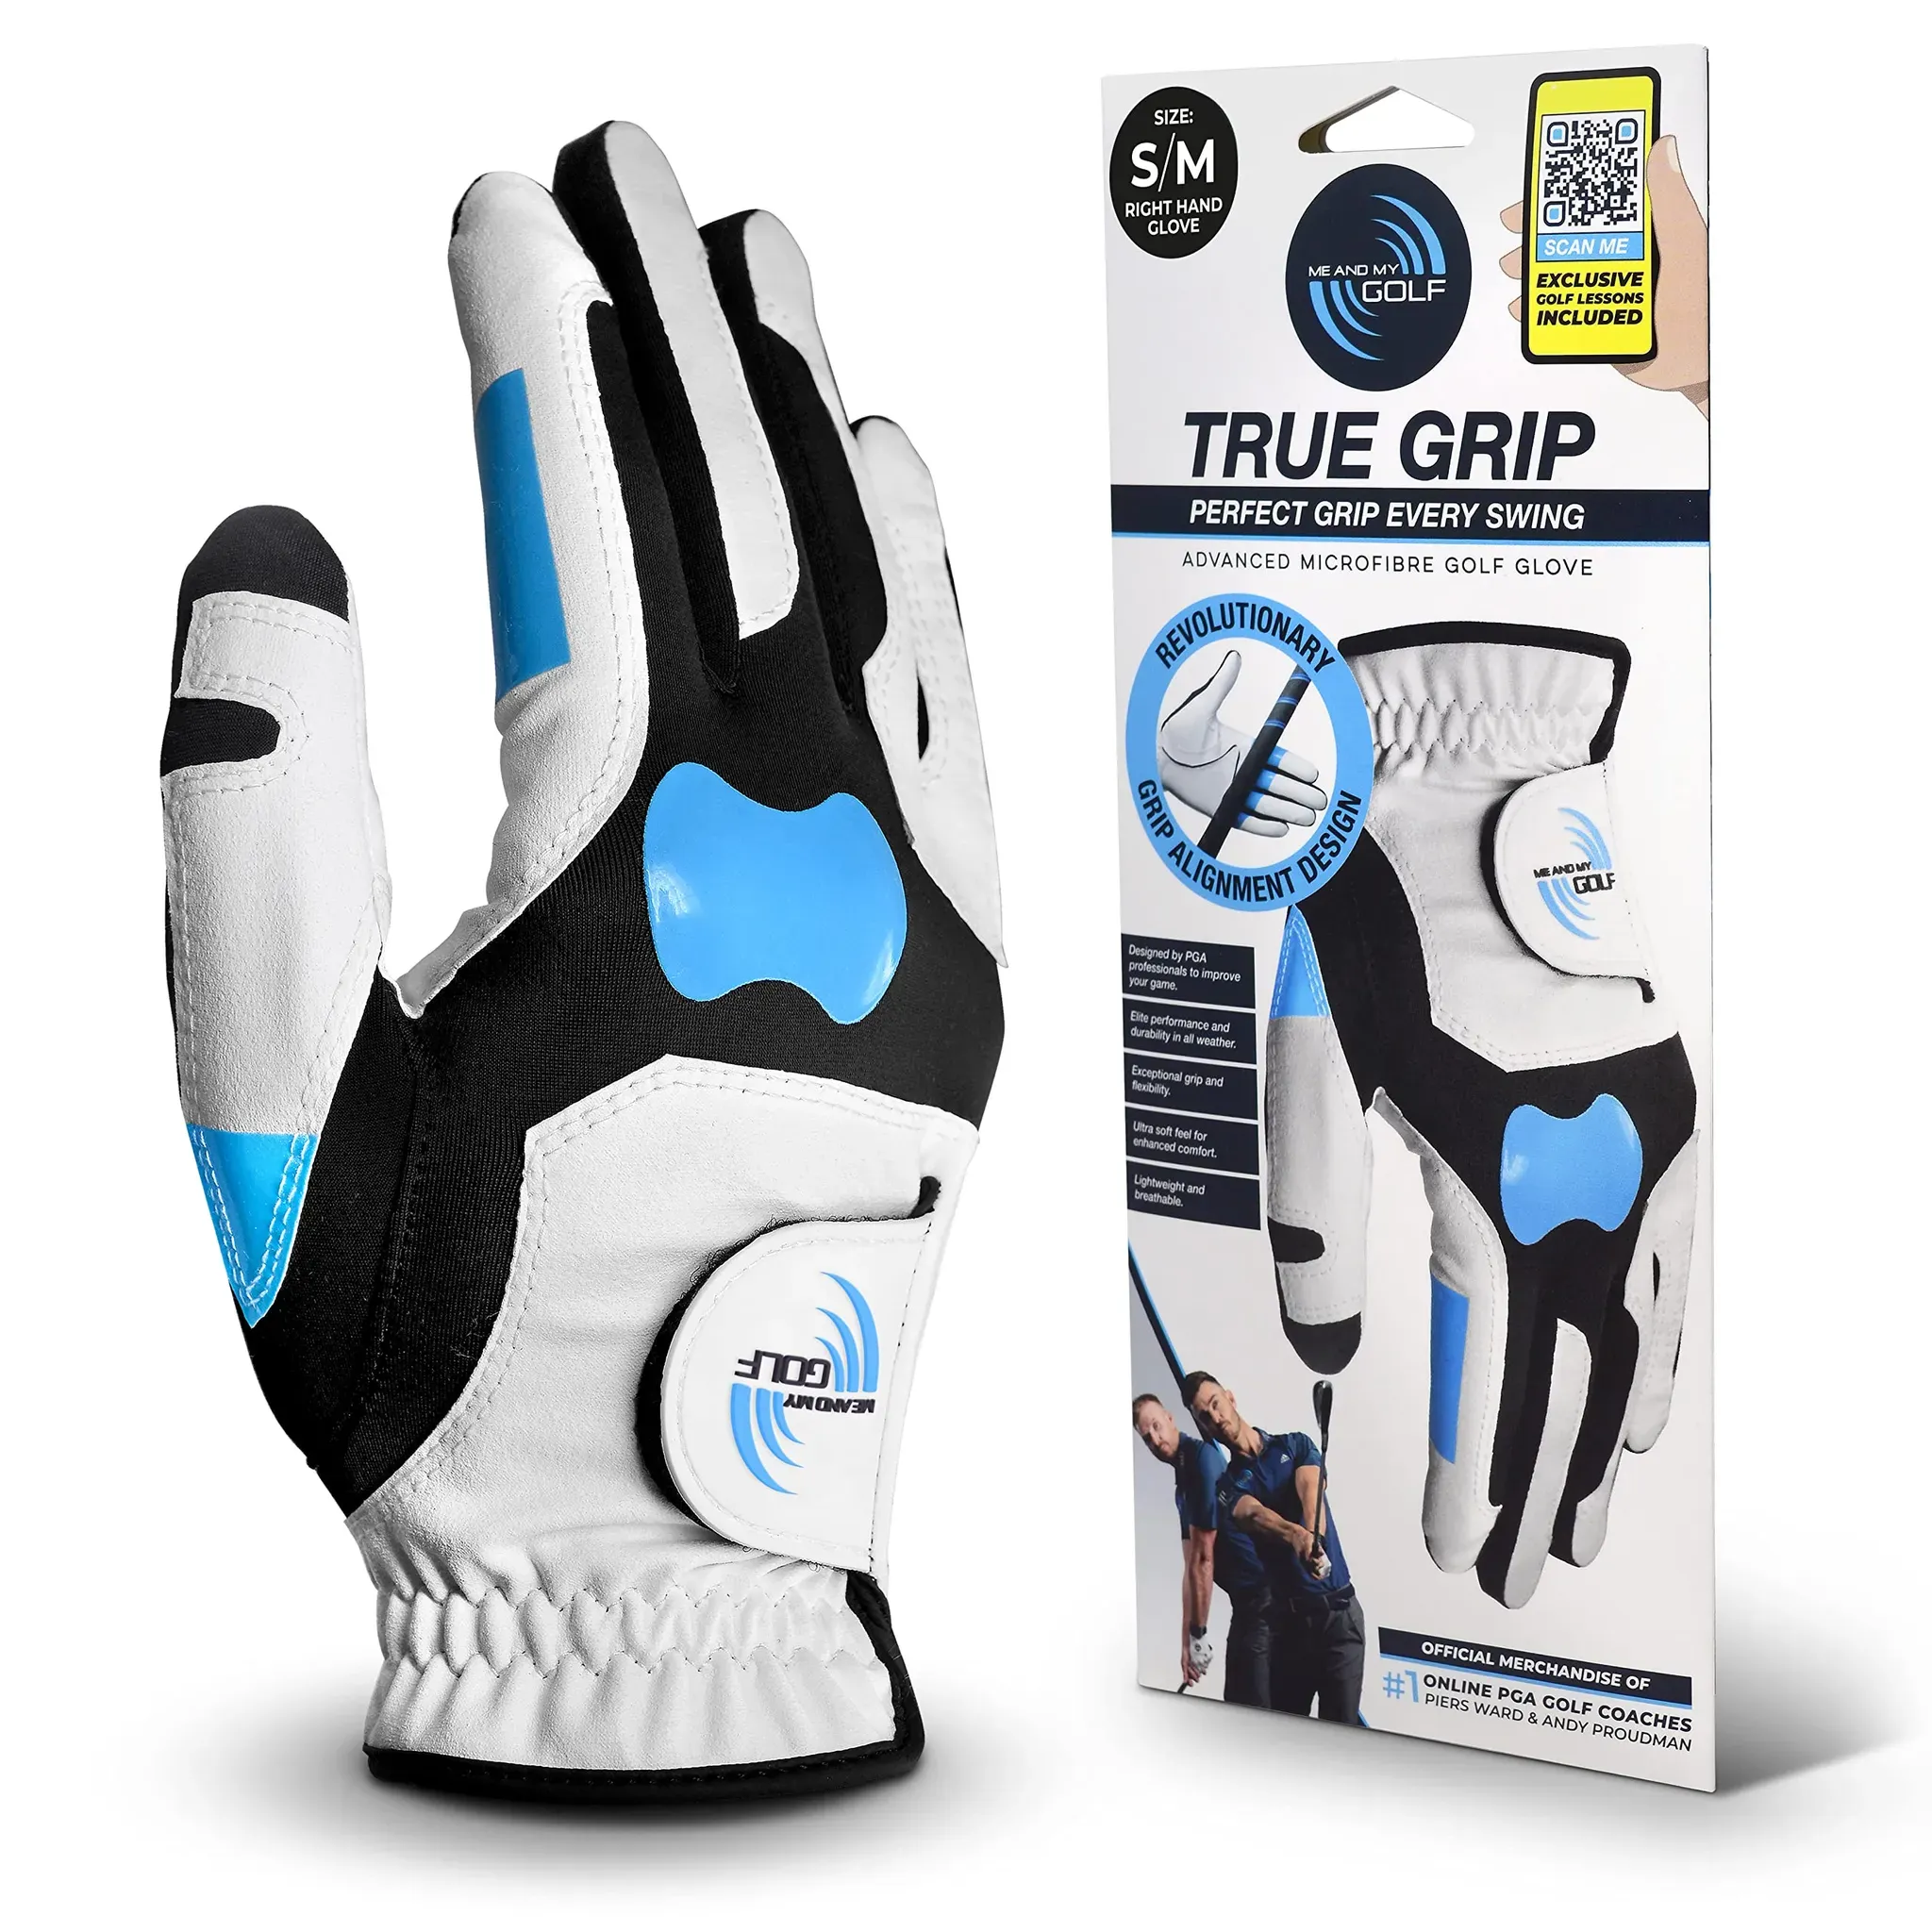 ME AND MY GOLF True Grip Training Golf Glove - Perfect Grip Every Swing - Size S/M Right Hand